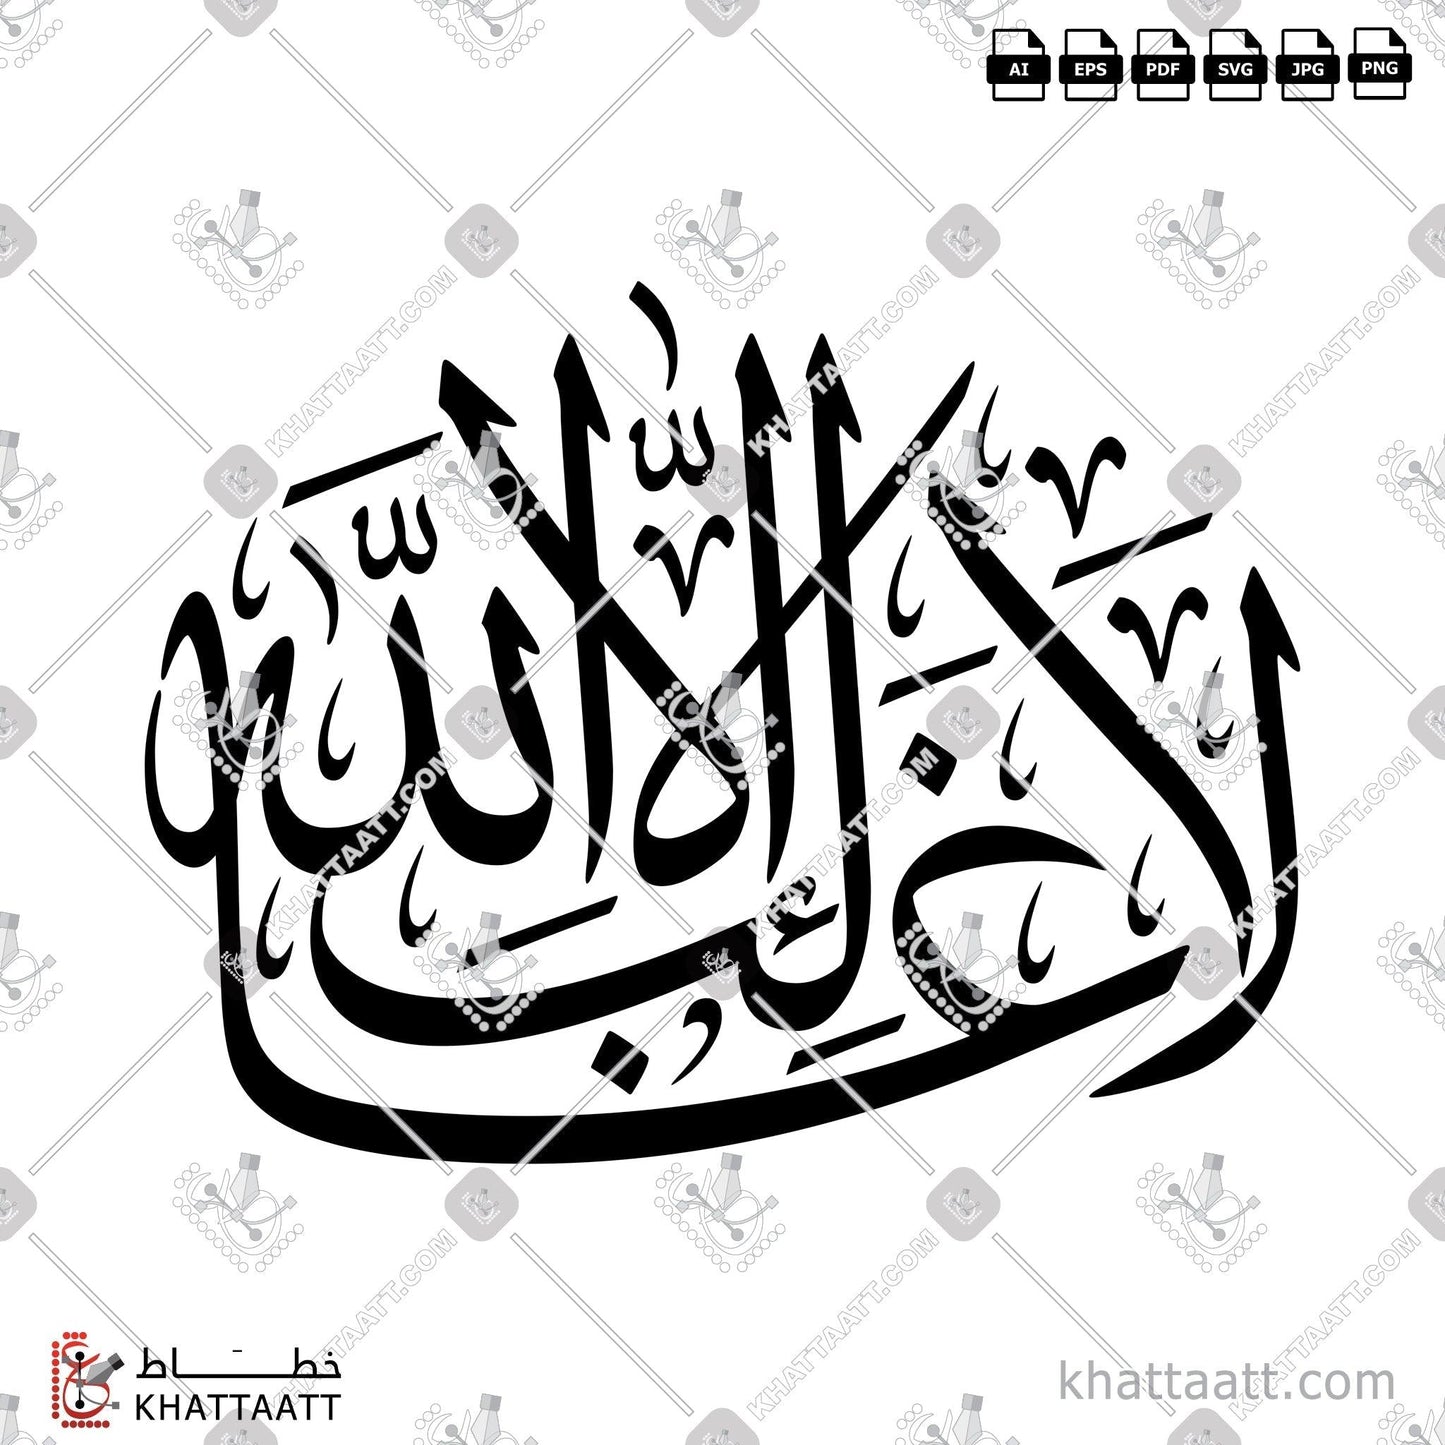 Download Arabic Calligraphy of لا غالب إلا الله in Thuluth - خط الثلث in vector and .png